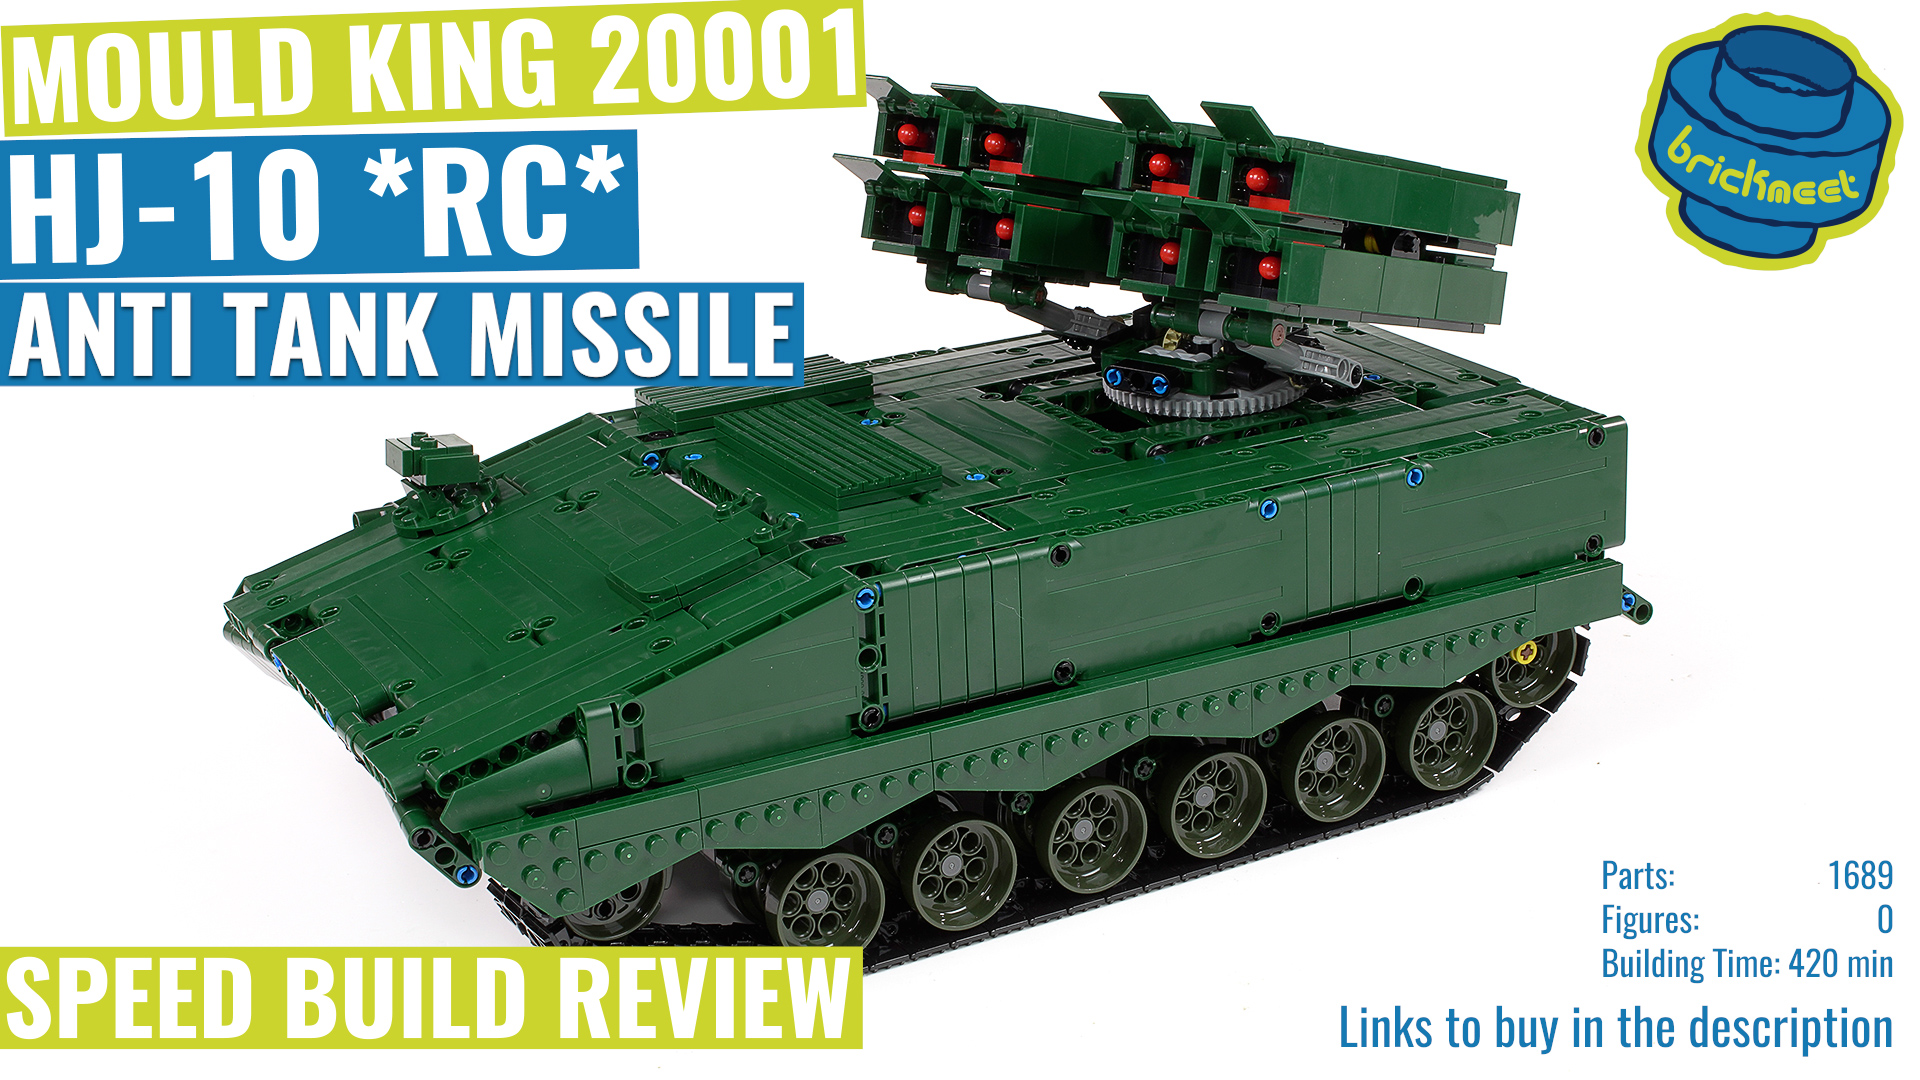 Mould King 20001 HJ-10 Anti Tank Missile - Speed Build Review EN